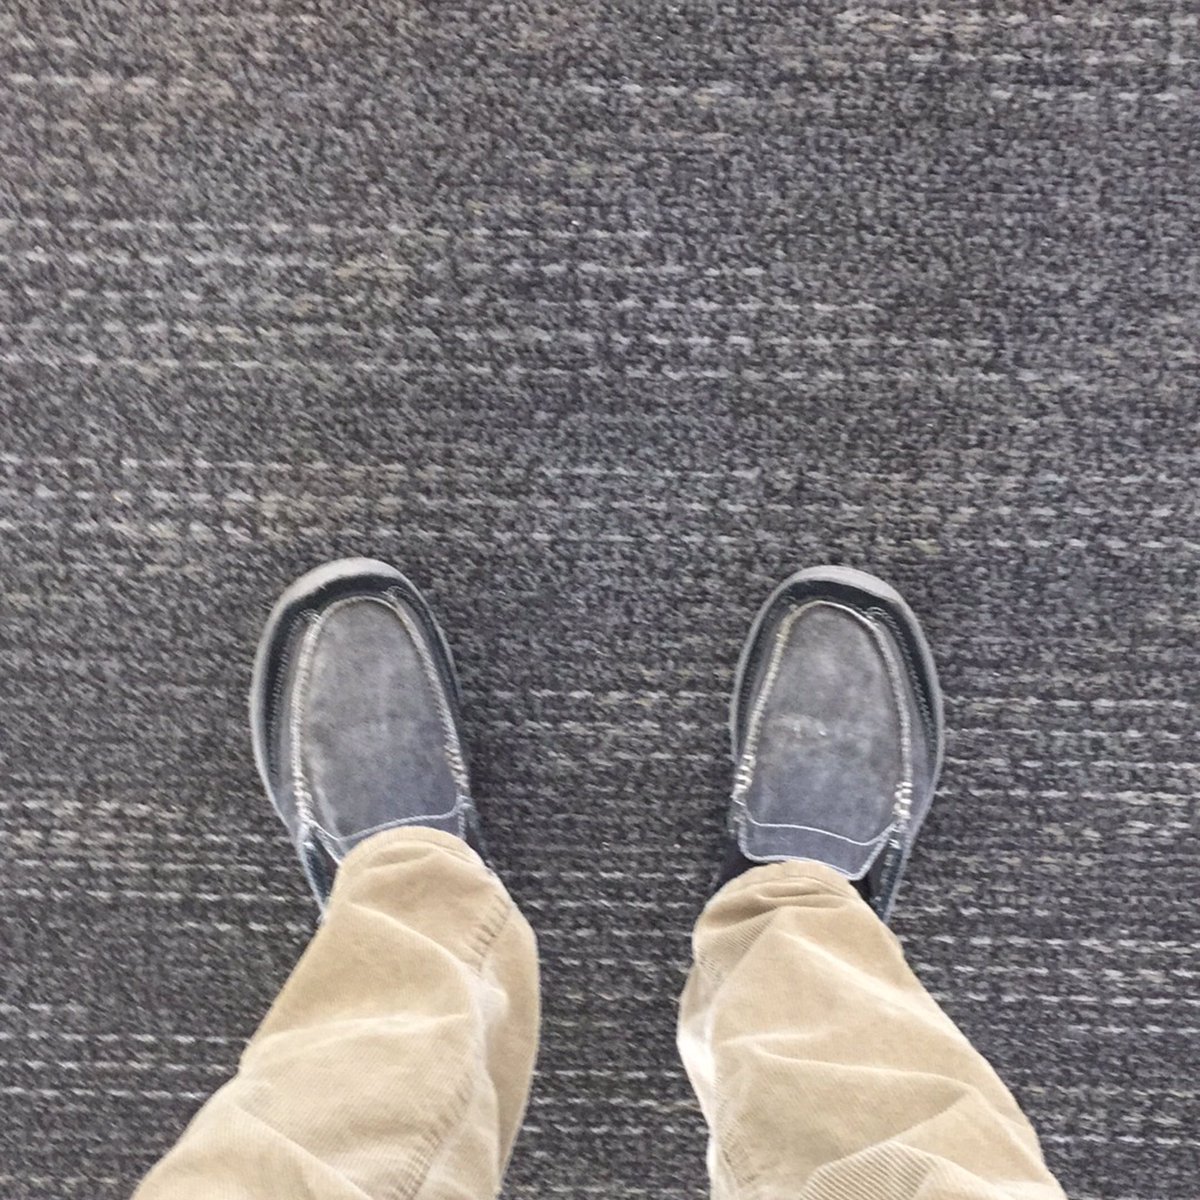 Just landed in SFO... this whole carpet/foot/selfie thing works better in Portland #NotPDX #GDC17